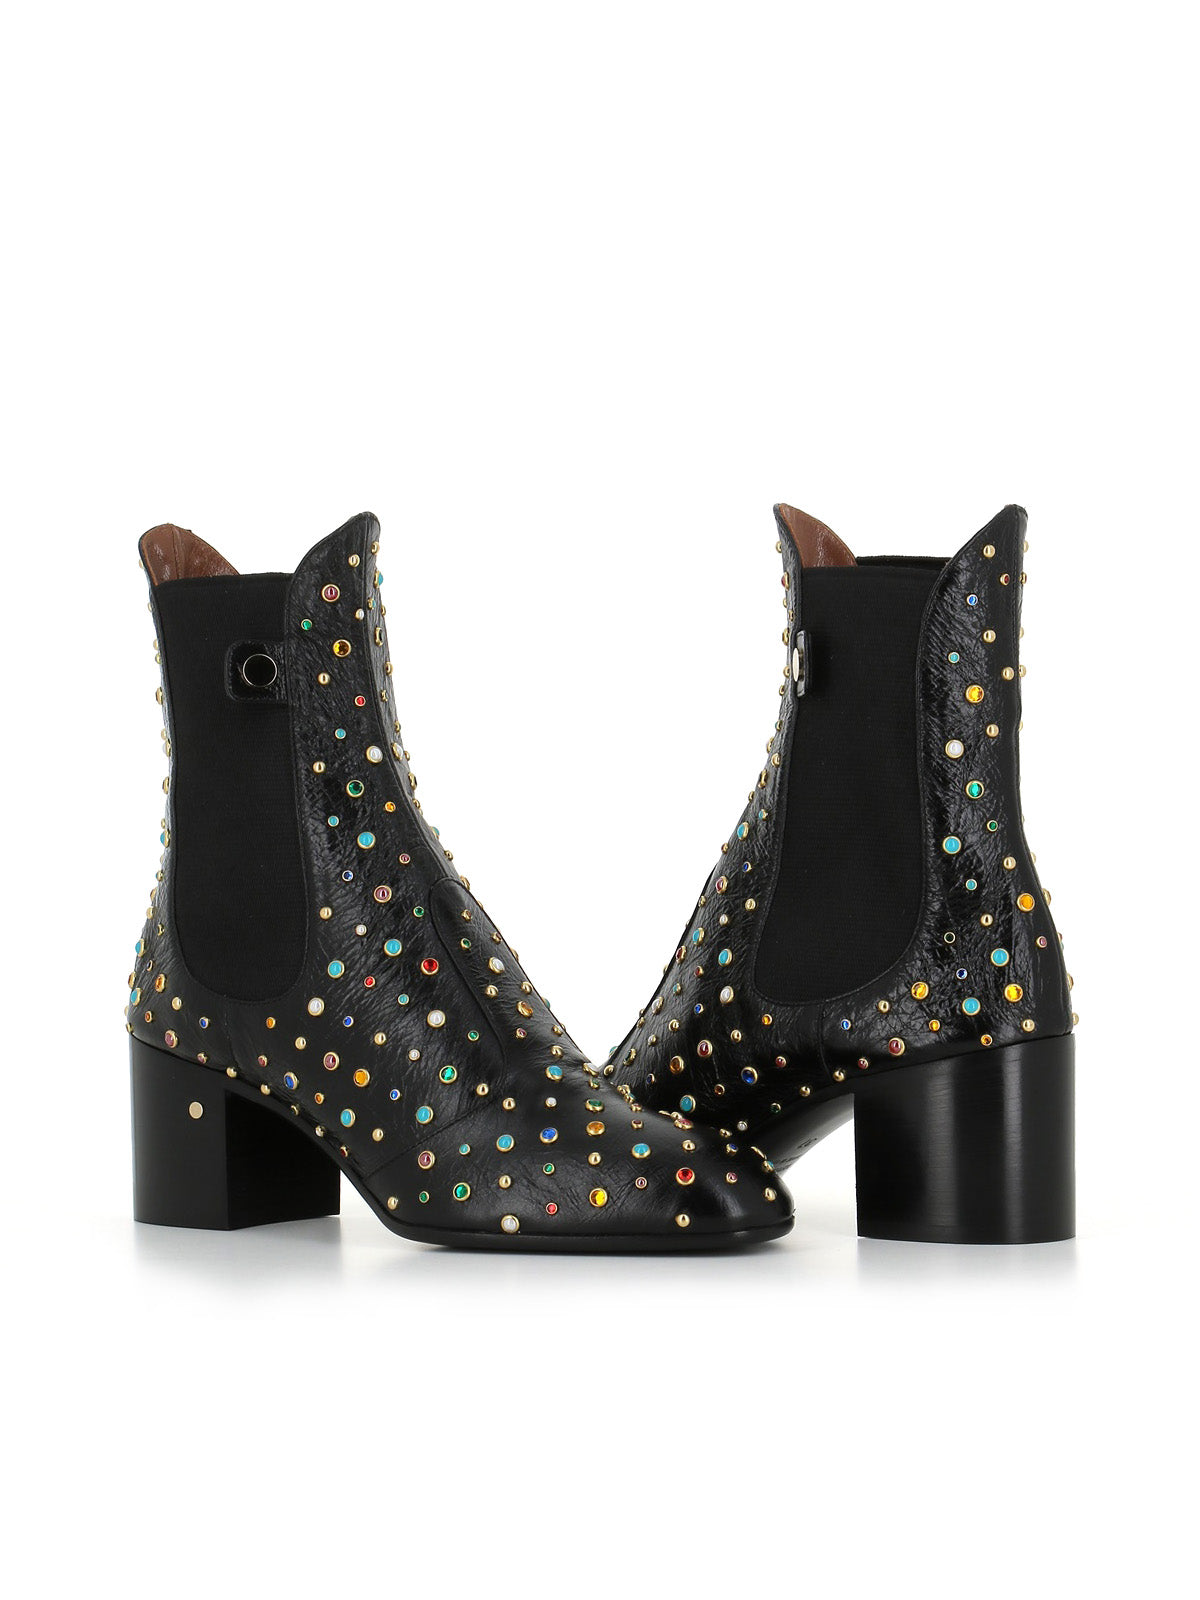  Laurence Dacade Stivaletto Angie Multicolor Studs Nero Donna - 1